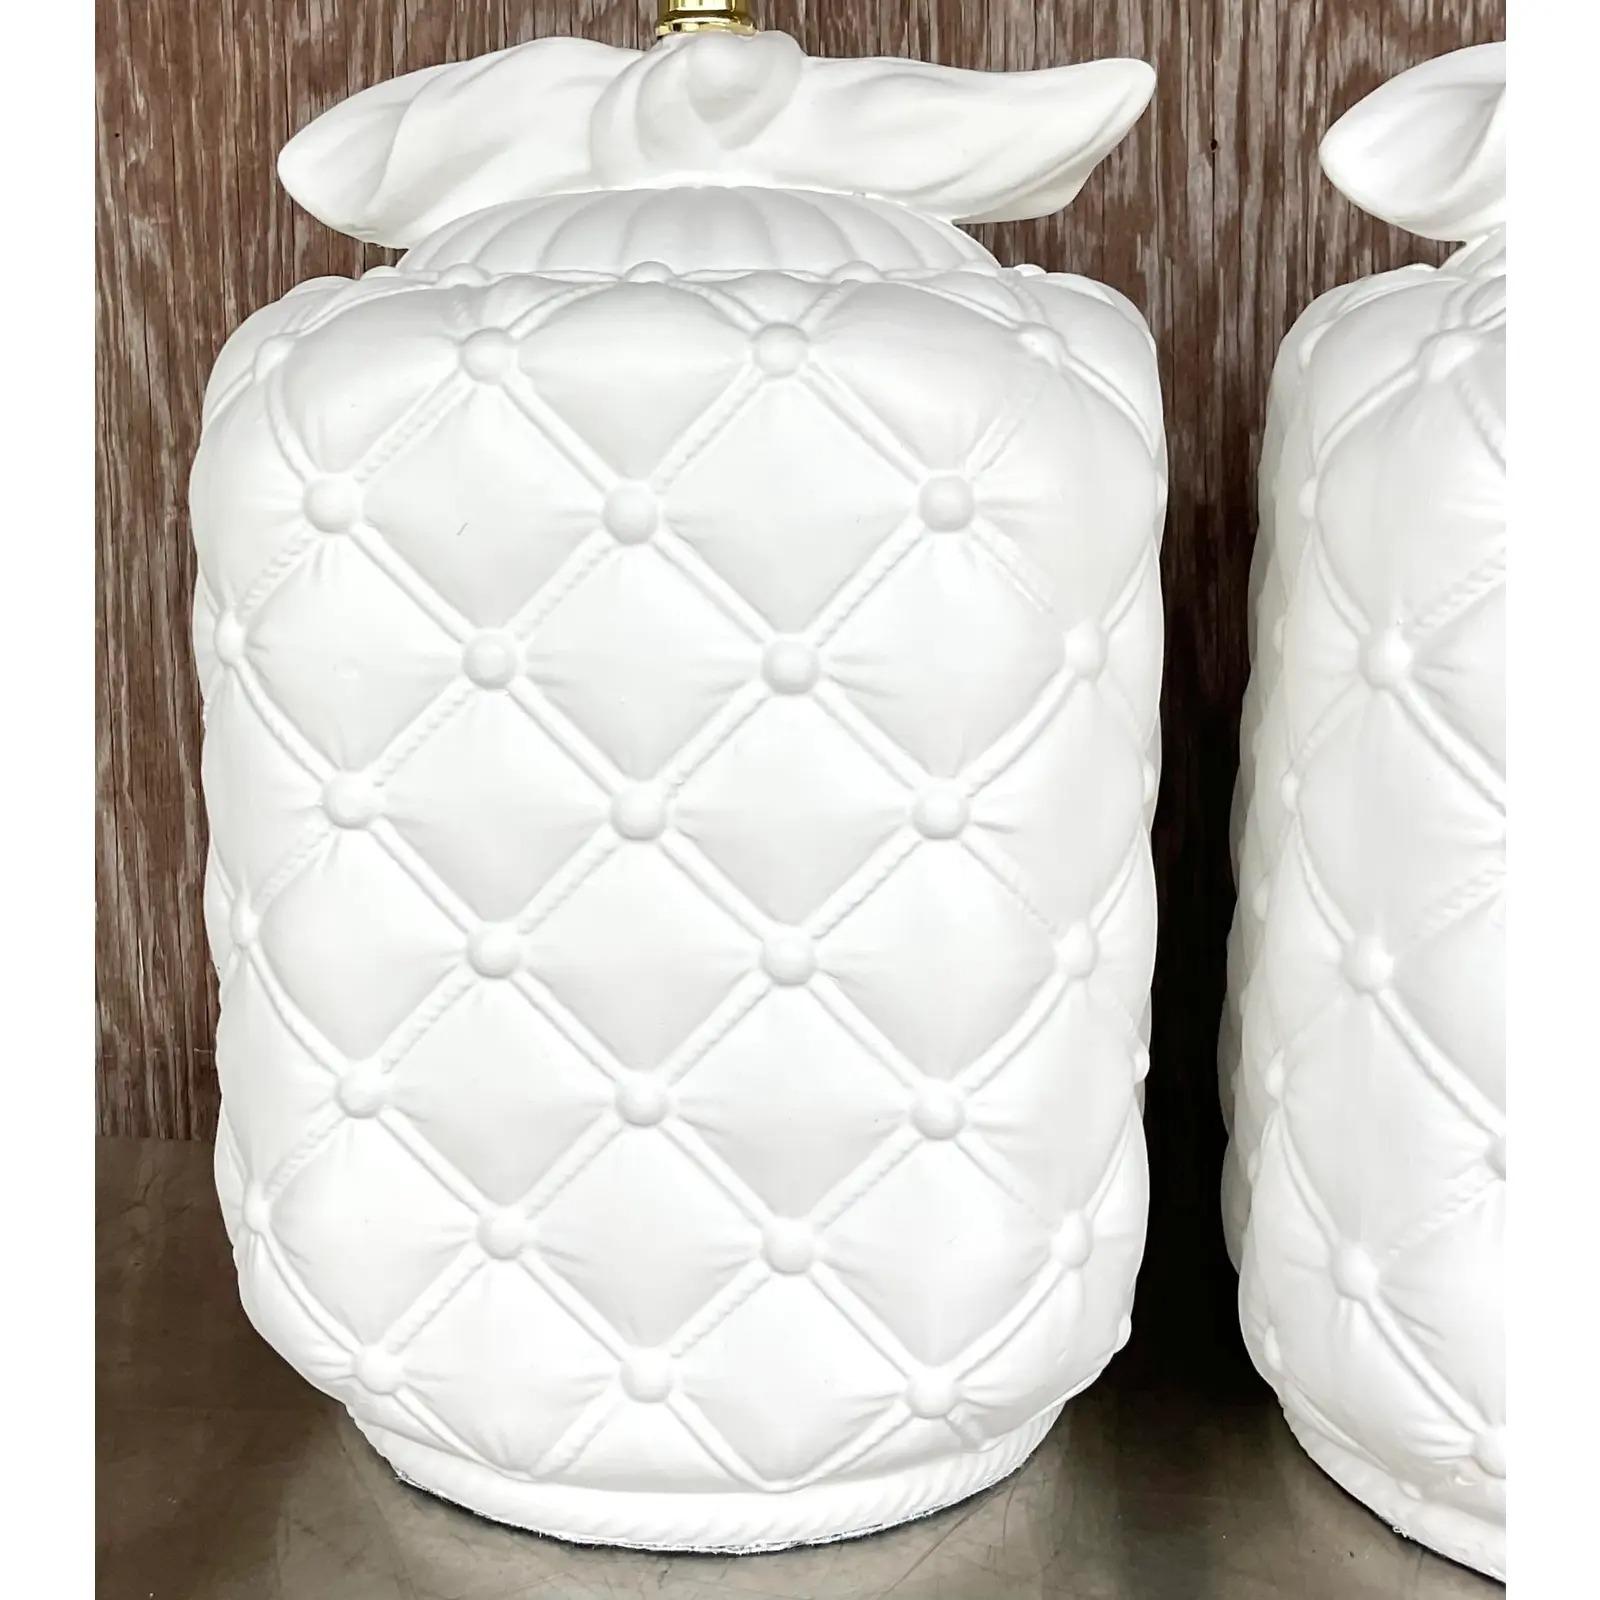 Vintage Regency Quilted Plaster Table Lamps - a Pair For Sale 4